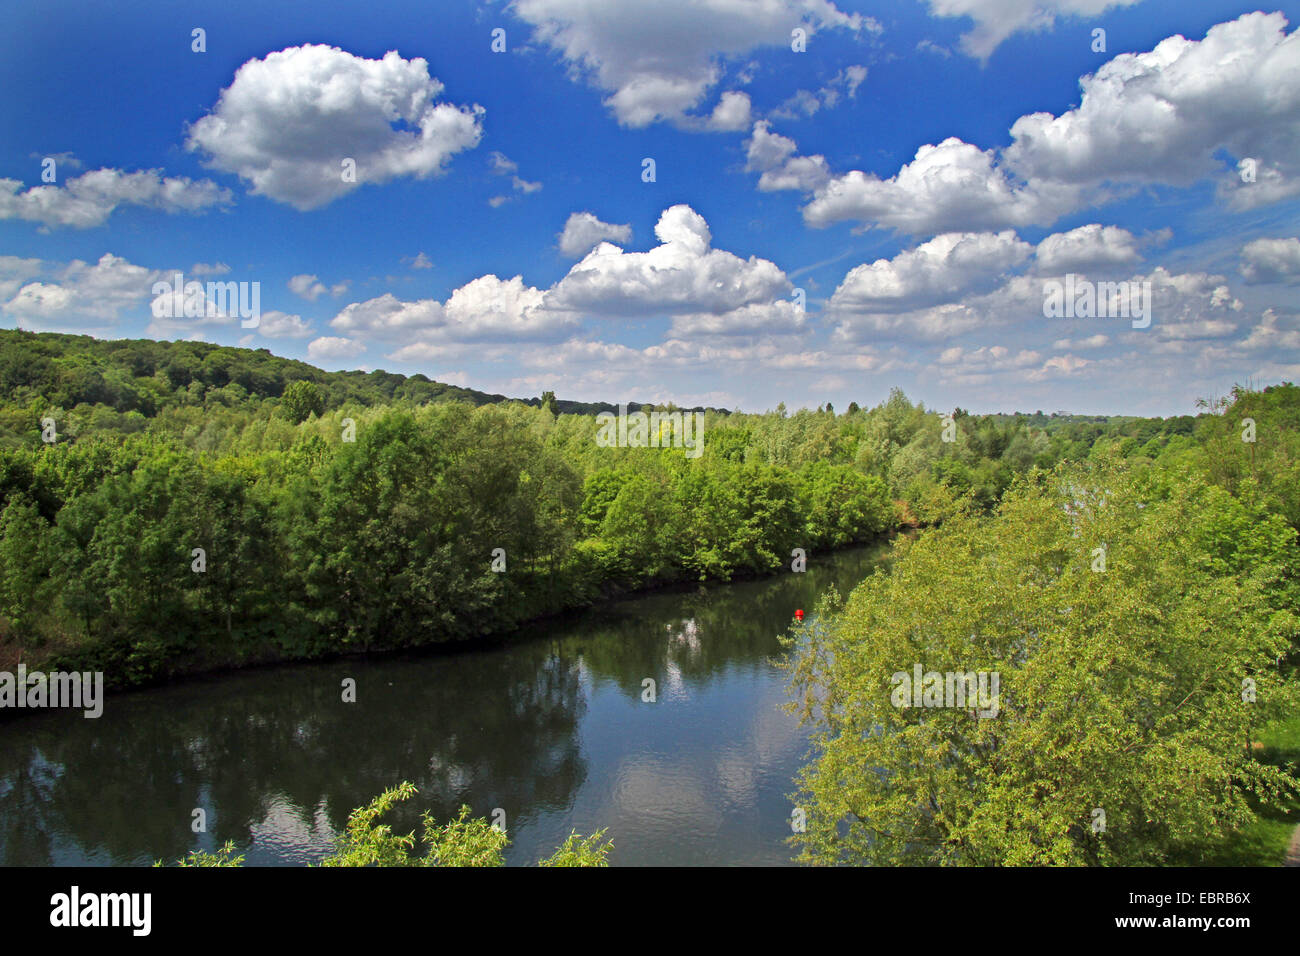 Heinsing Ruhr river banks and cumulus clouds, Germany, North Rhine-Westphalia, Ruhr Area, Essen Stock Photo